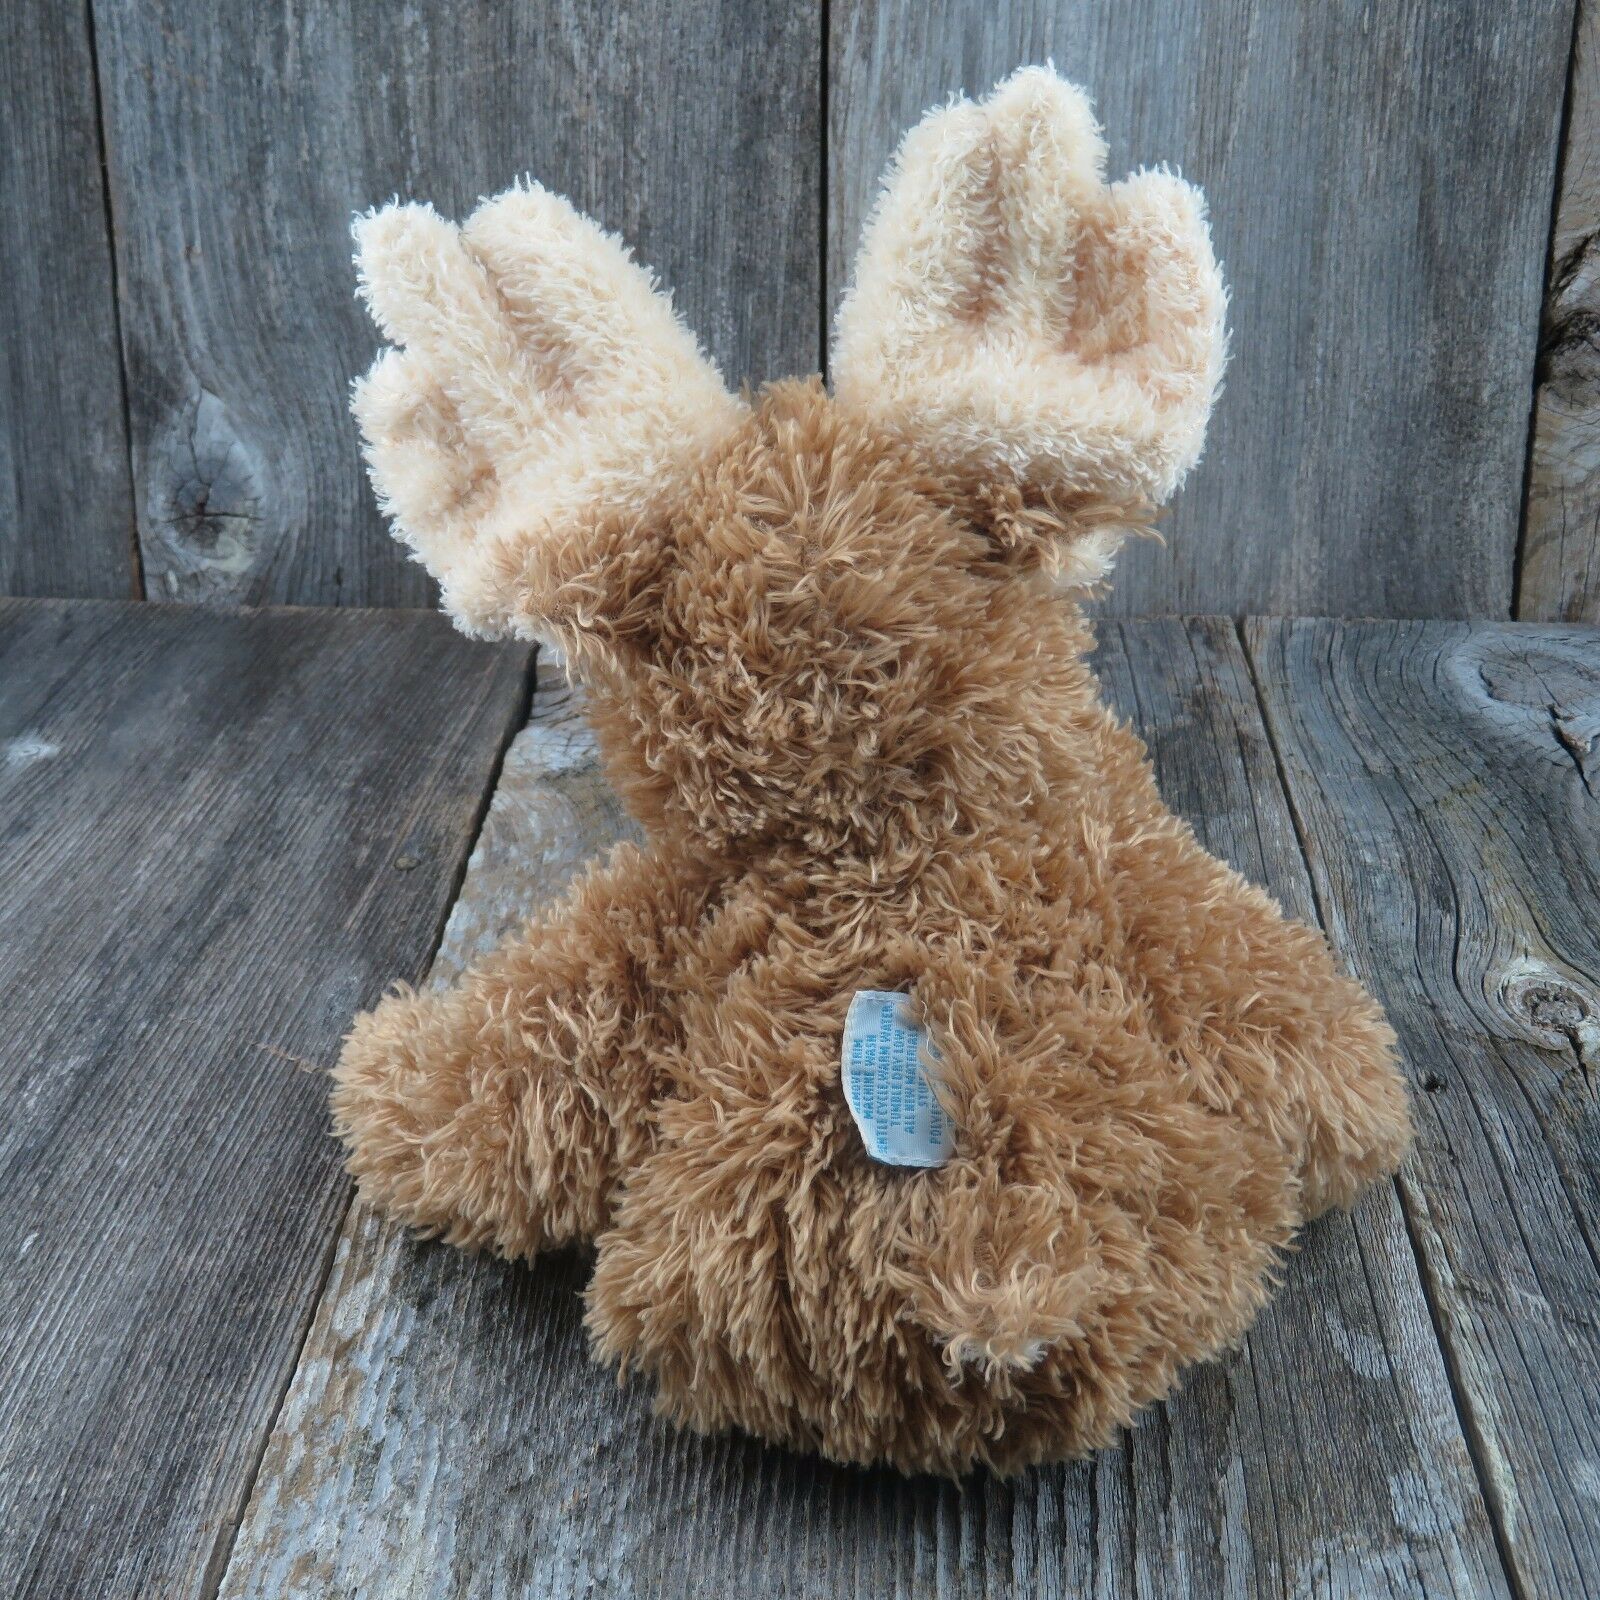 Moose Plush Baby Rattle Stuffed Animal Boyds Collection Tan Honey Fuzzy Soft - At Grandma's Table